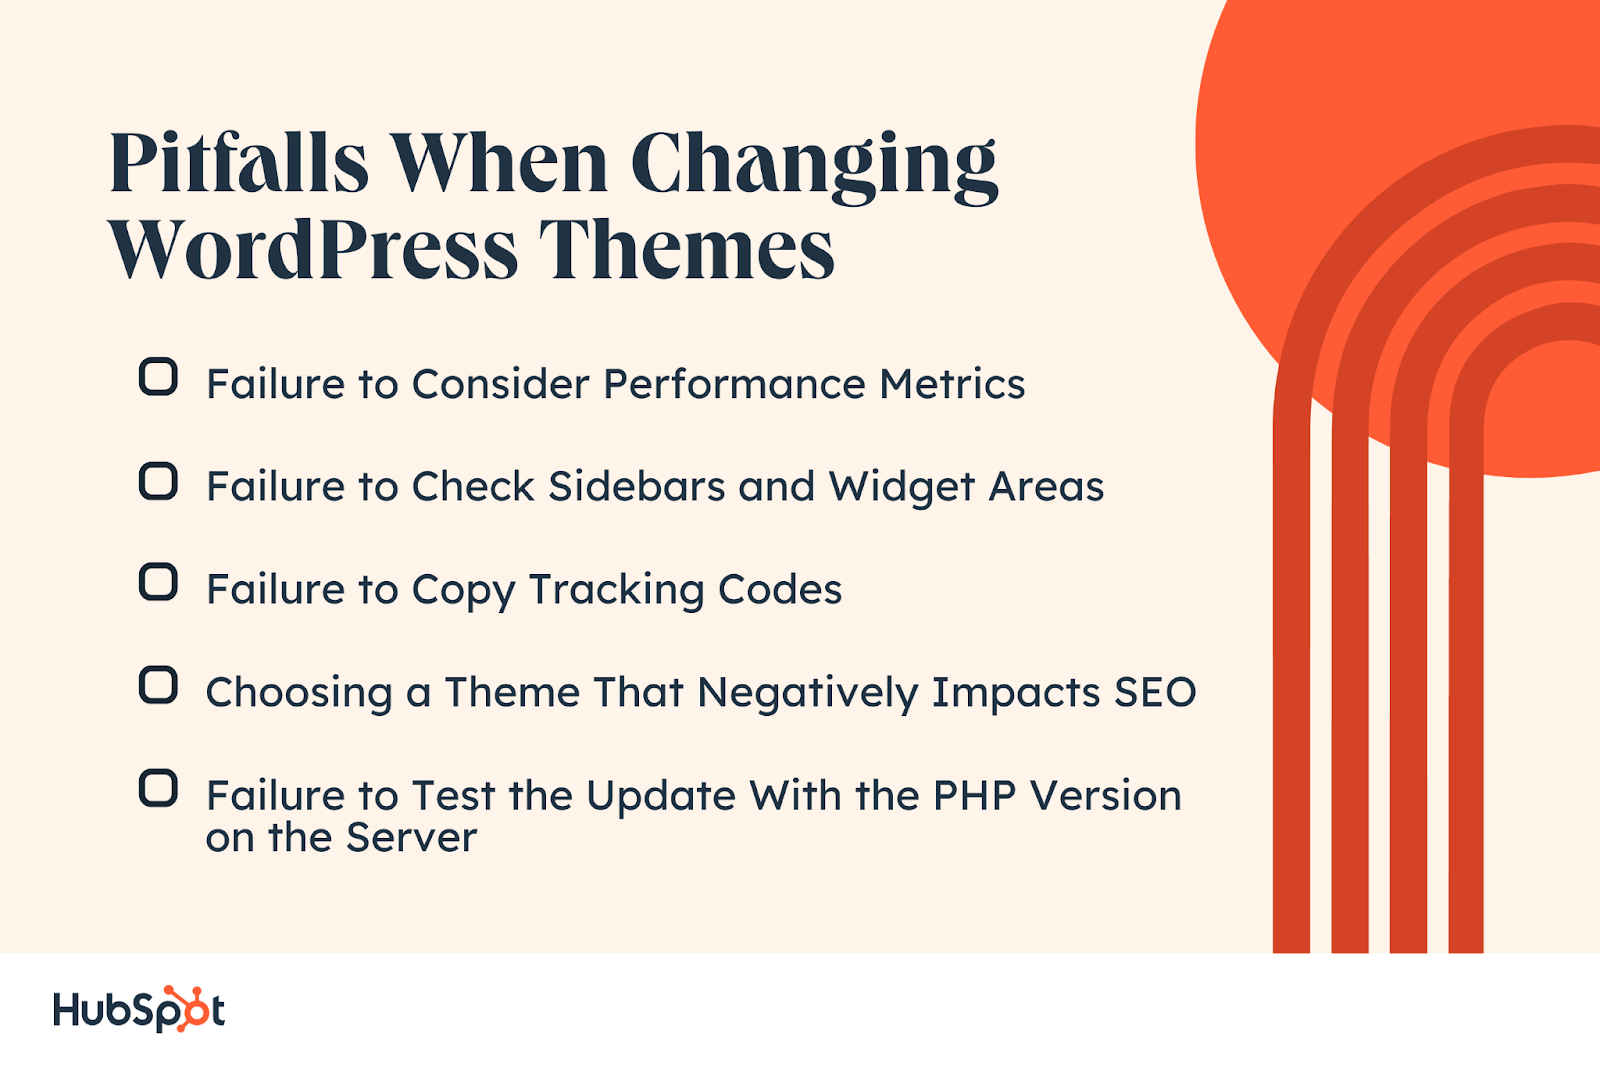 Pitfalls When Changing WordPress Themes. Failure to Consider Performance Metrics. Failure to Check Sidebars and Widget Areas. Failure to Copy Tracking Codes. Choosing a Theme That Negatively Impacts SEO. Failure to Test the Update With the PHP Version on the Server.